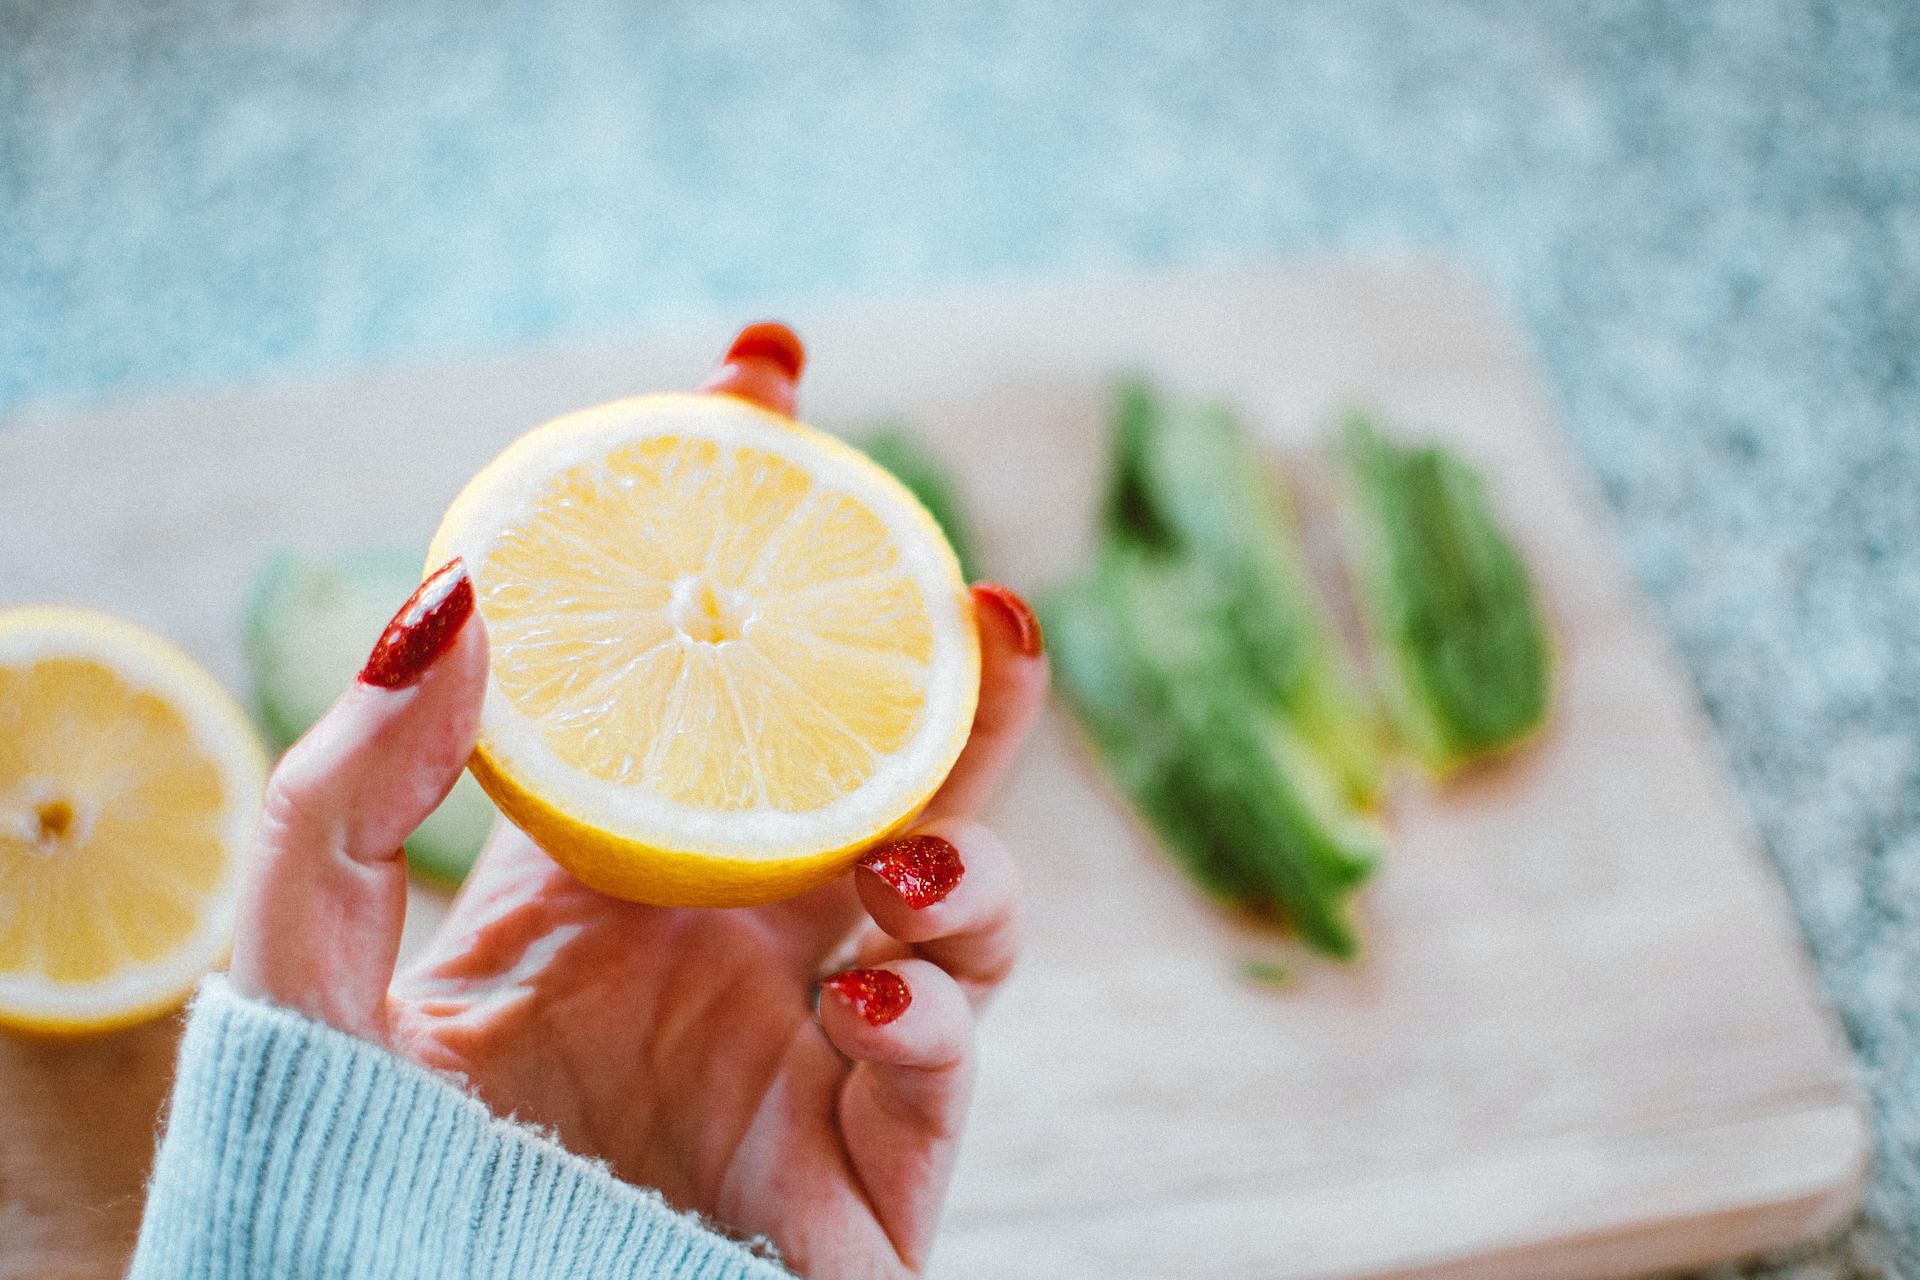 Importance of vitamins for weight loss (image sourced via Pexels / Photo by lisa)